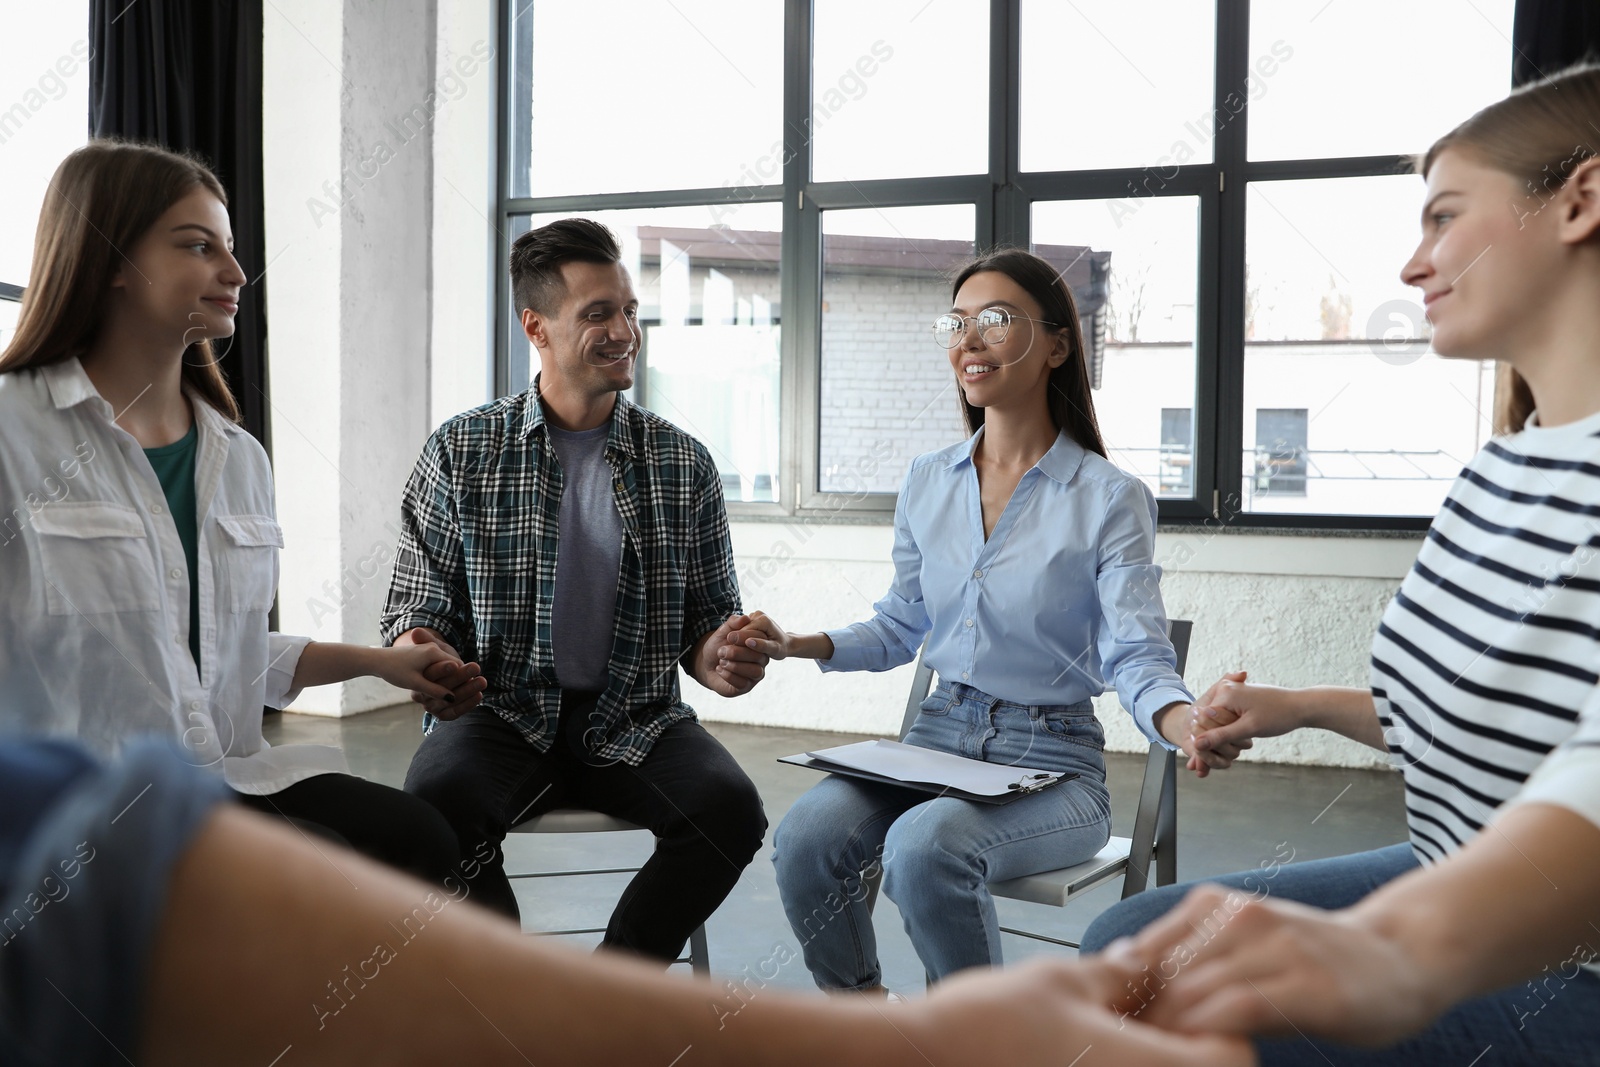 Photo of Psychotherapist holding hands with patients during group therapy session indoors